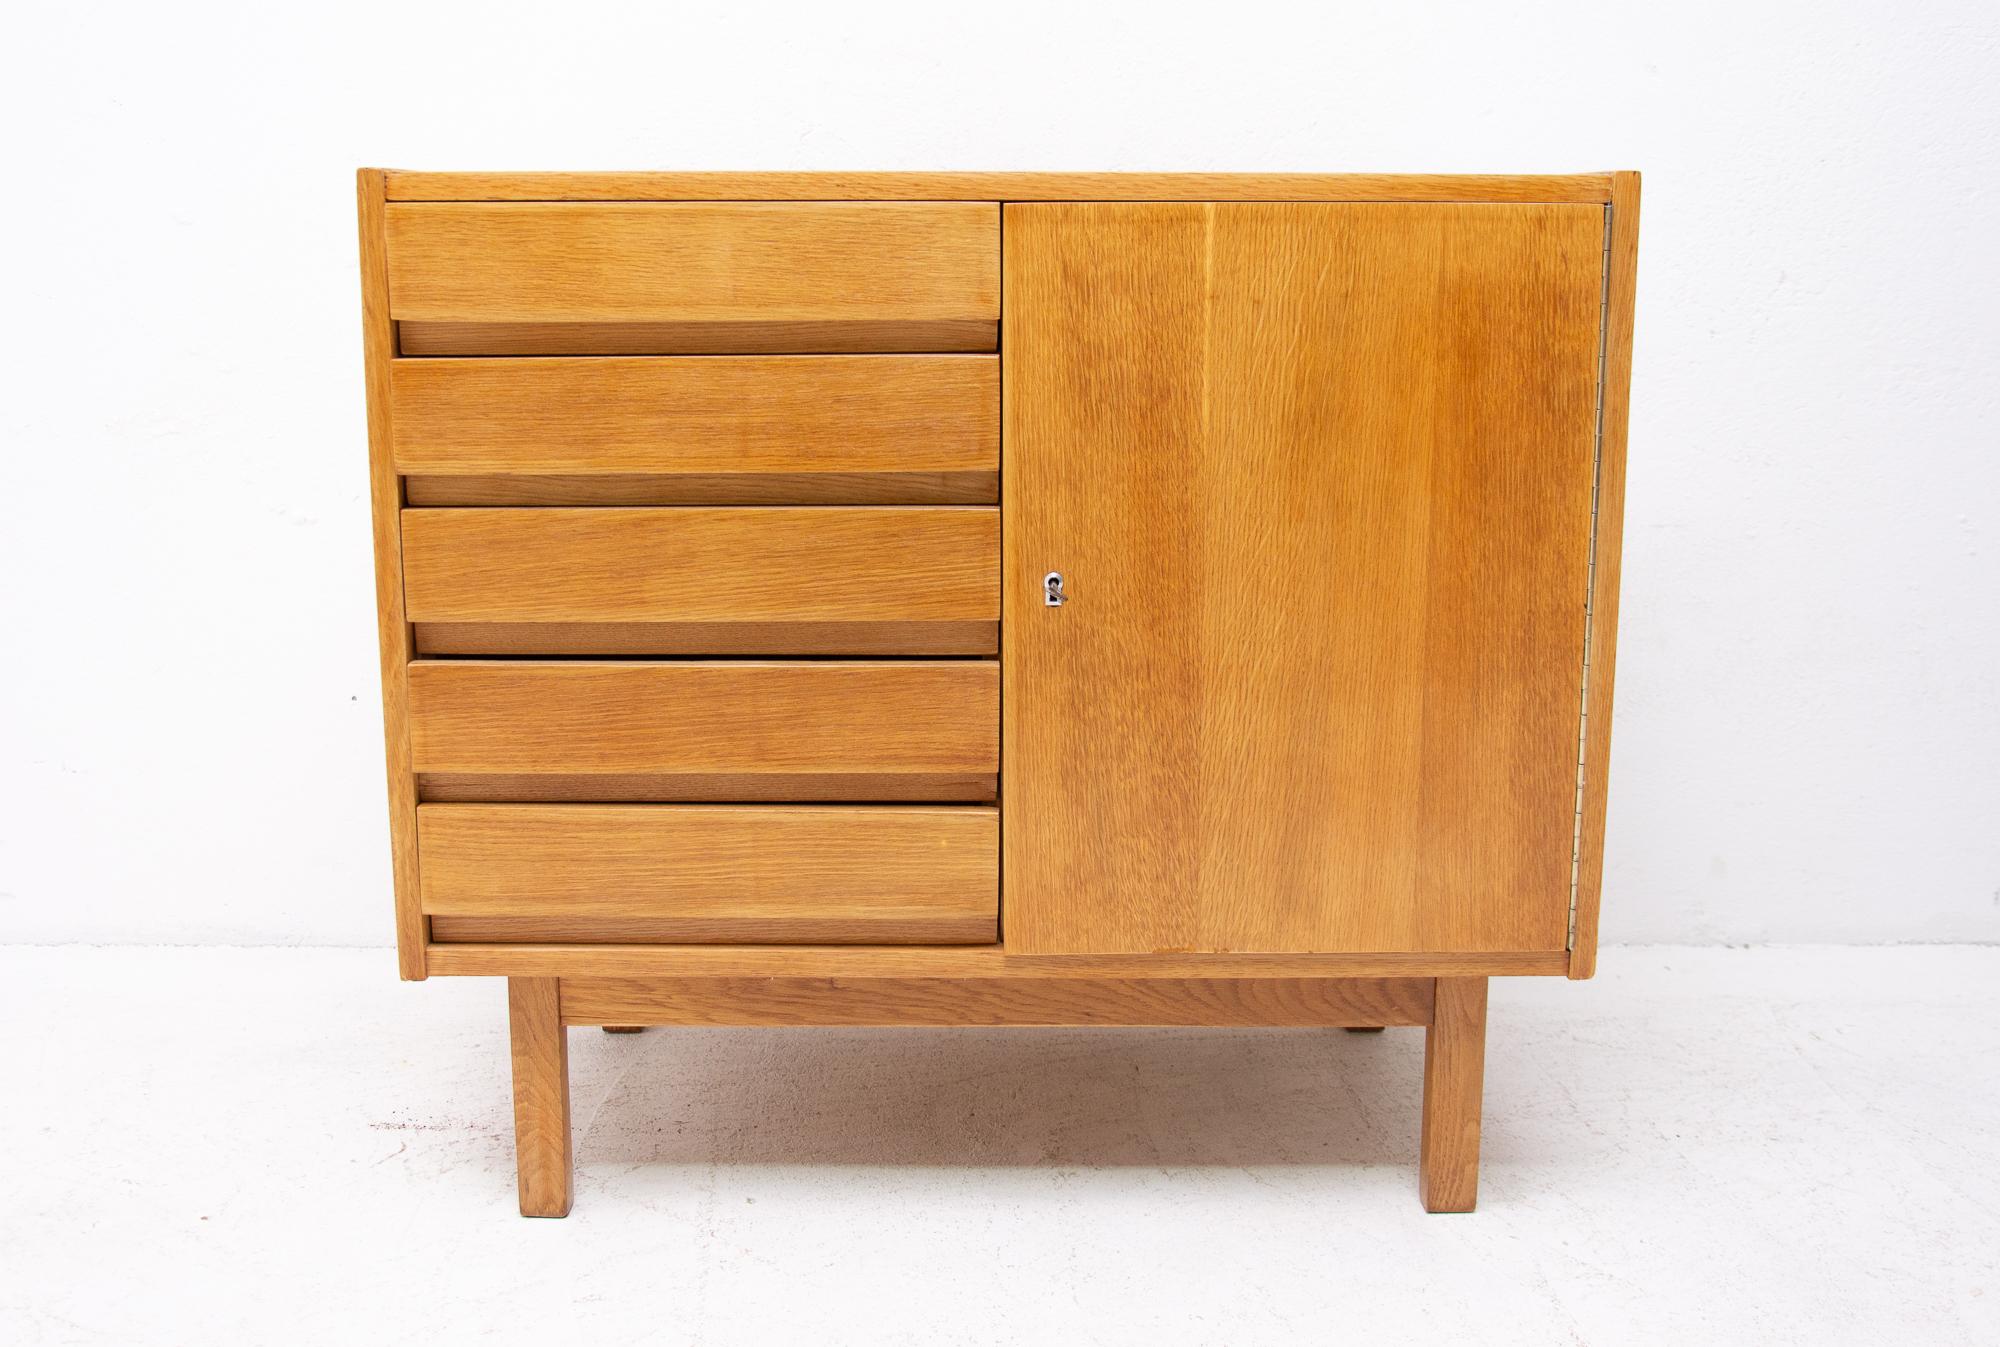 Midcentury chest of drawers, made in the former Czechoslovakia in the 1960s. This model is associated with the world-famous EXPO 58 in Brussels. It´s made of beechwood and plywood. The chest is in excellent condition, fully refurbished.